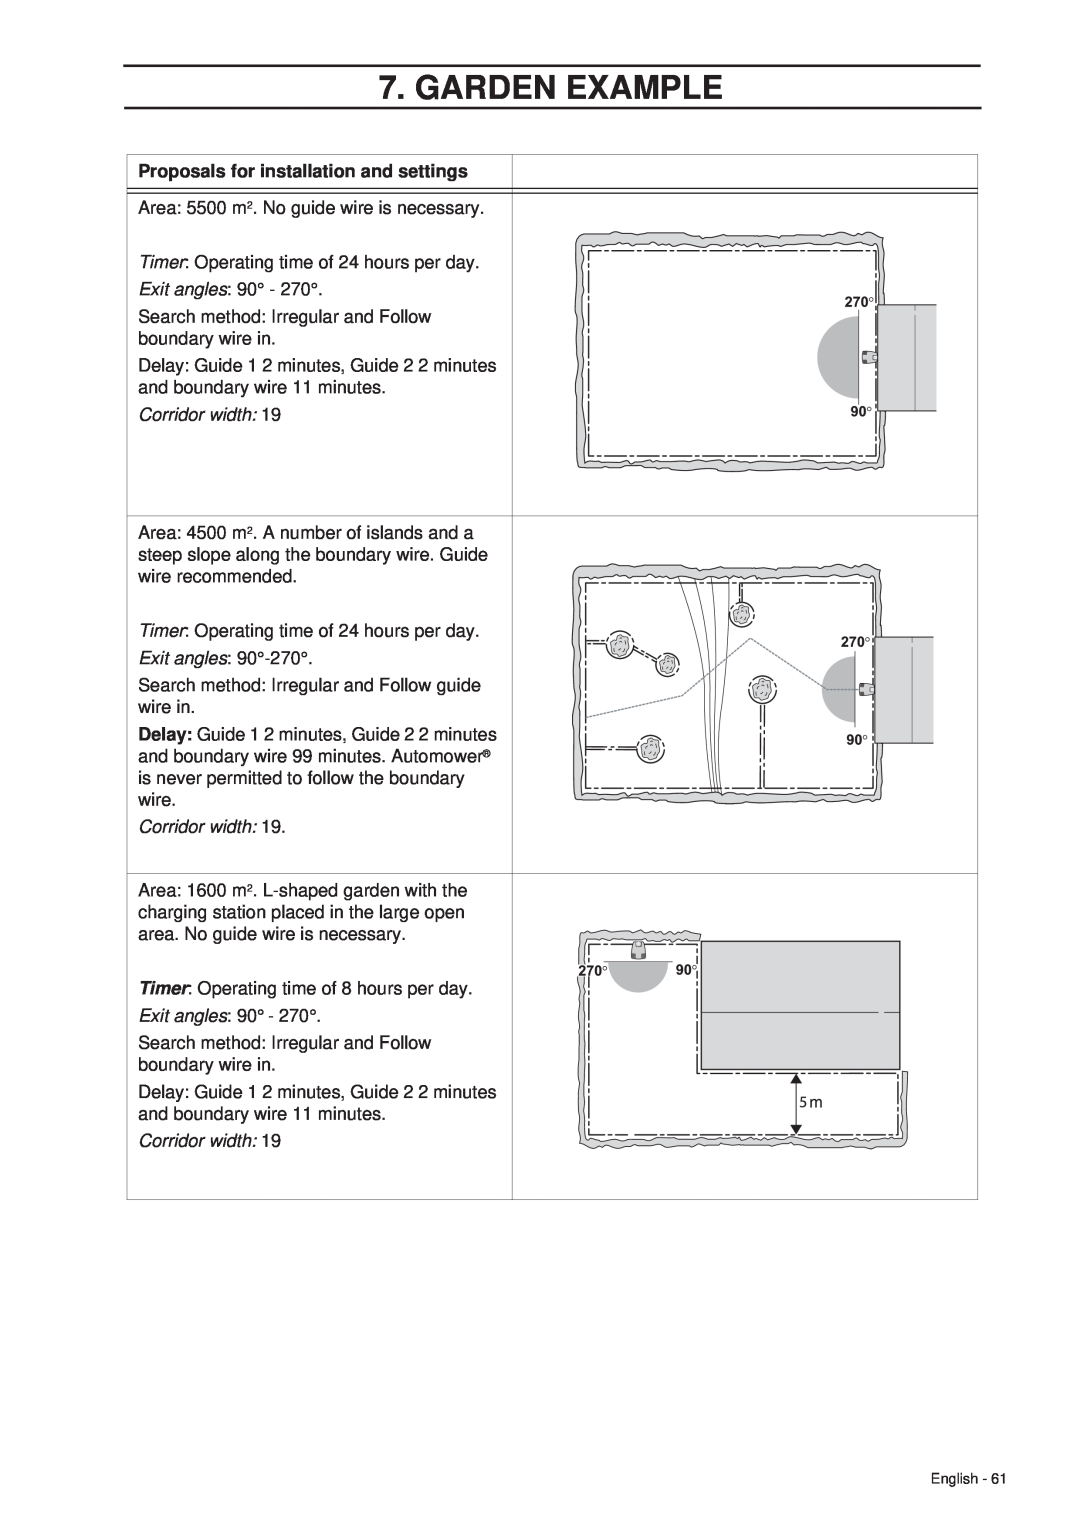 Husqvarna 260 ACX manual Garden Example, Proposals for installation and settings 